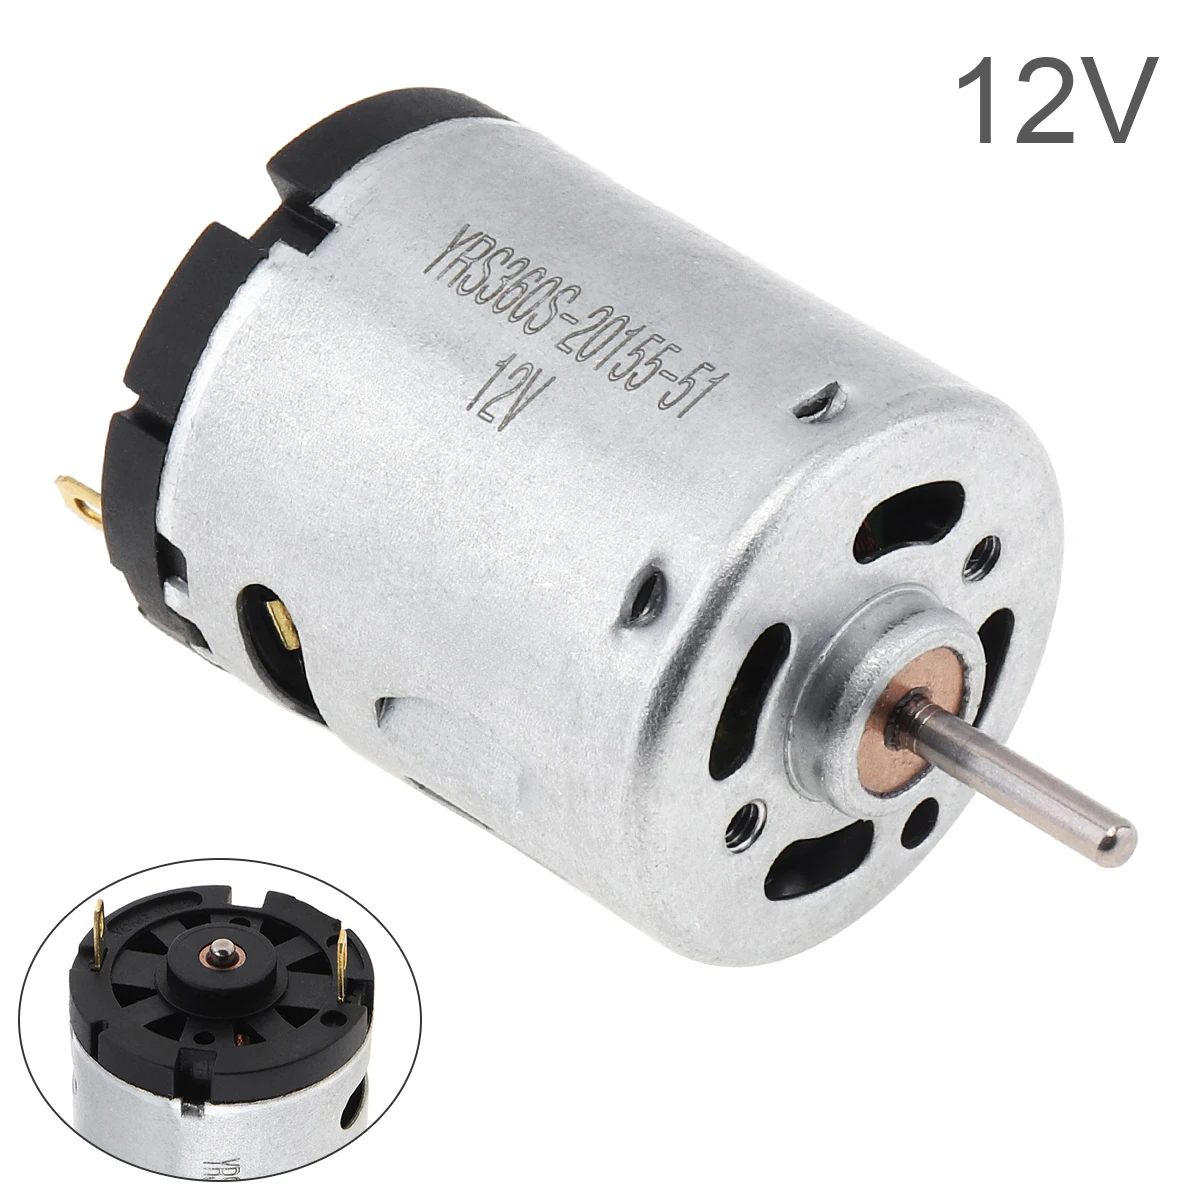 RS360 DC Motor 12V 12000RPM High Speed Carbon Brush Micro Motors for DIY Toy Hair Dryer Electric Fans